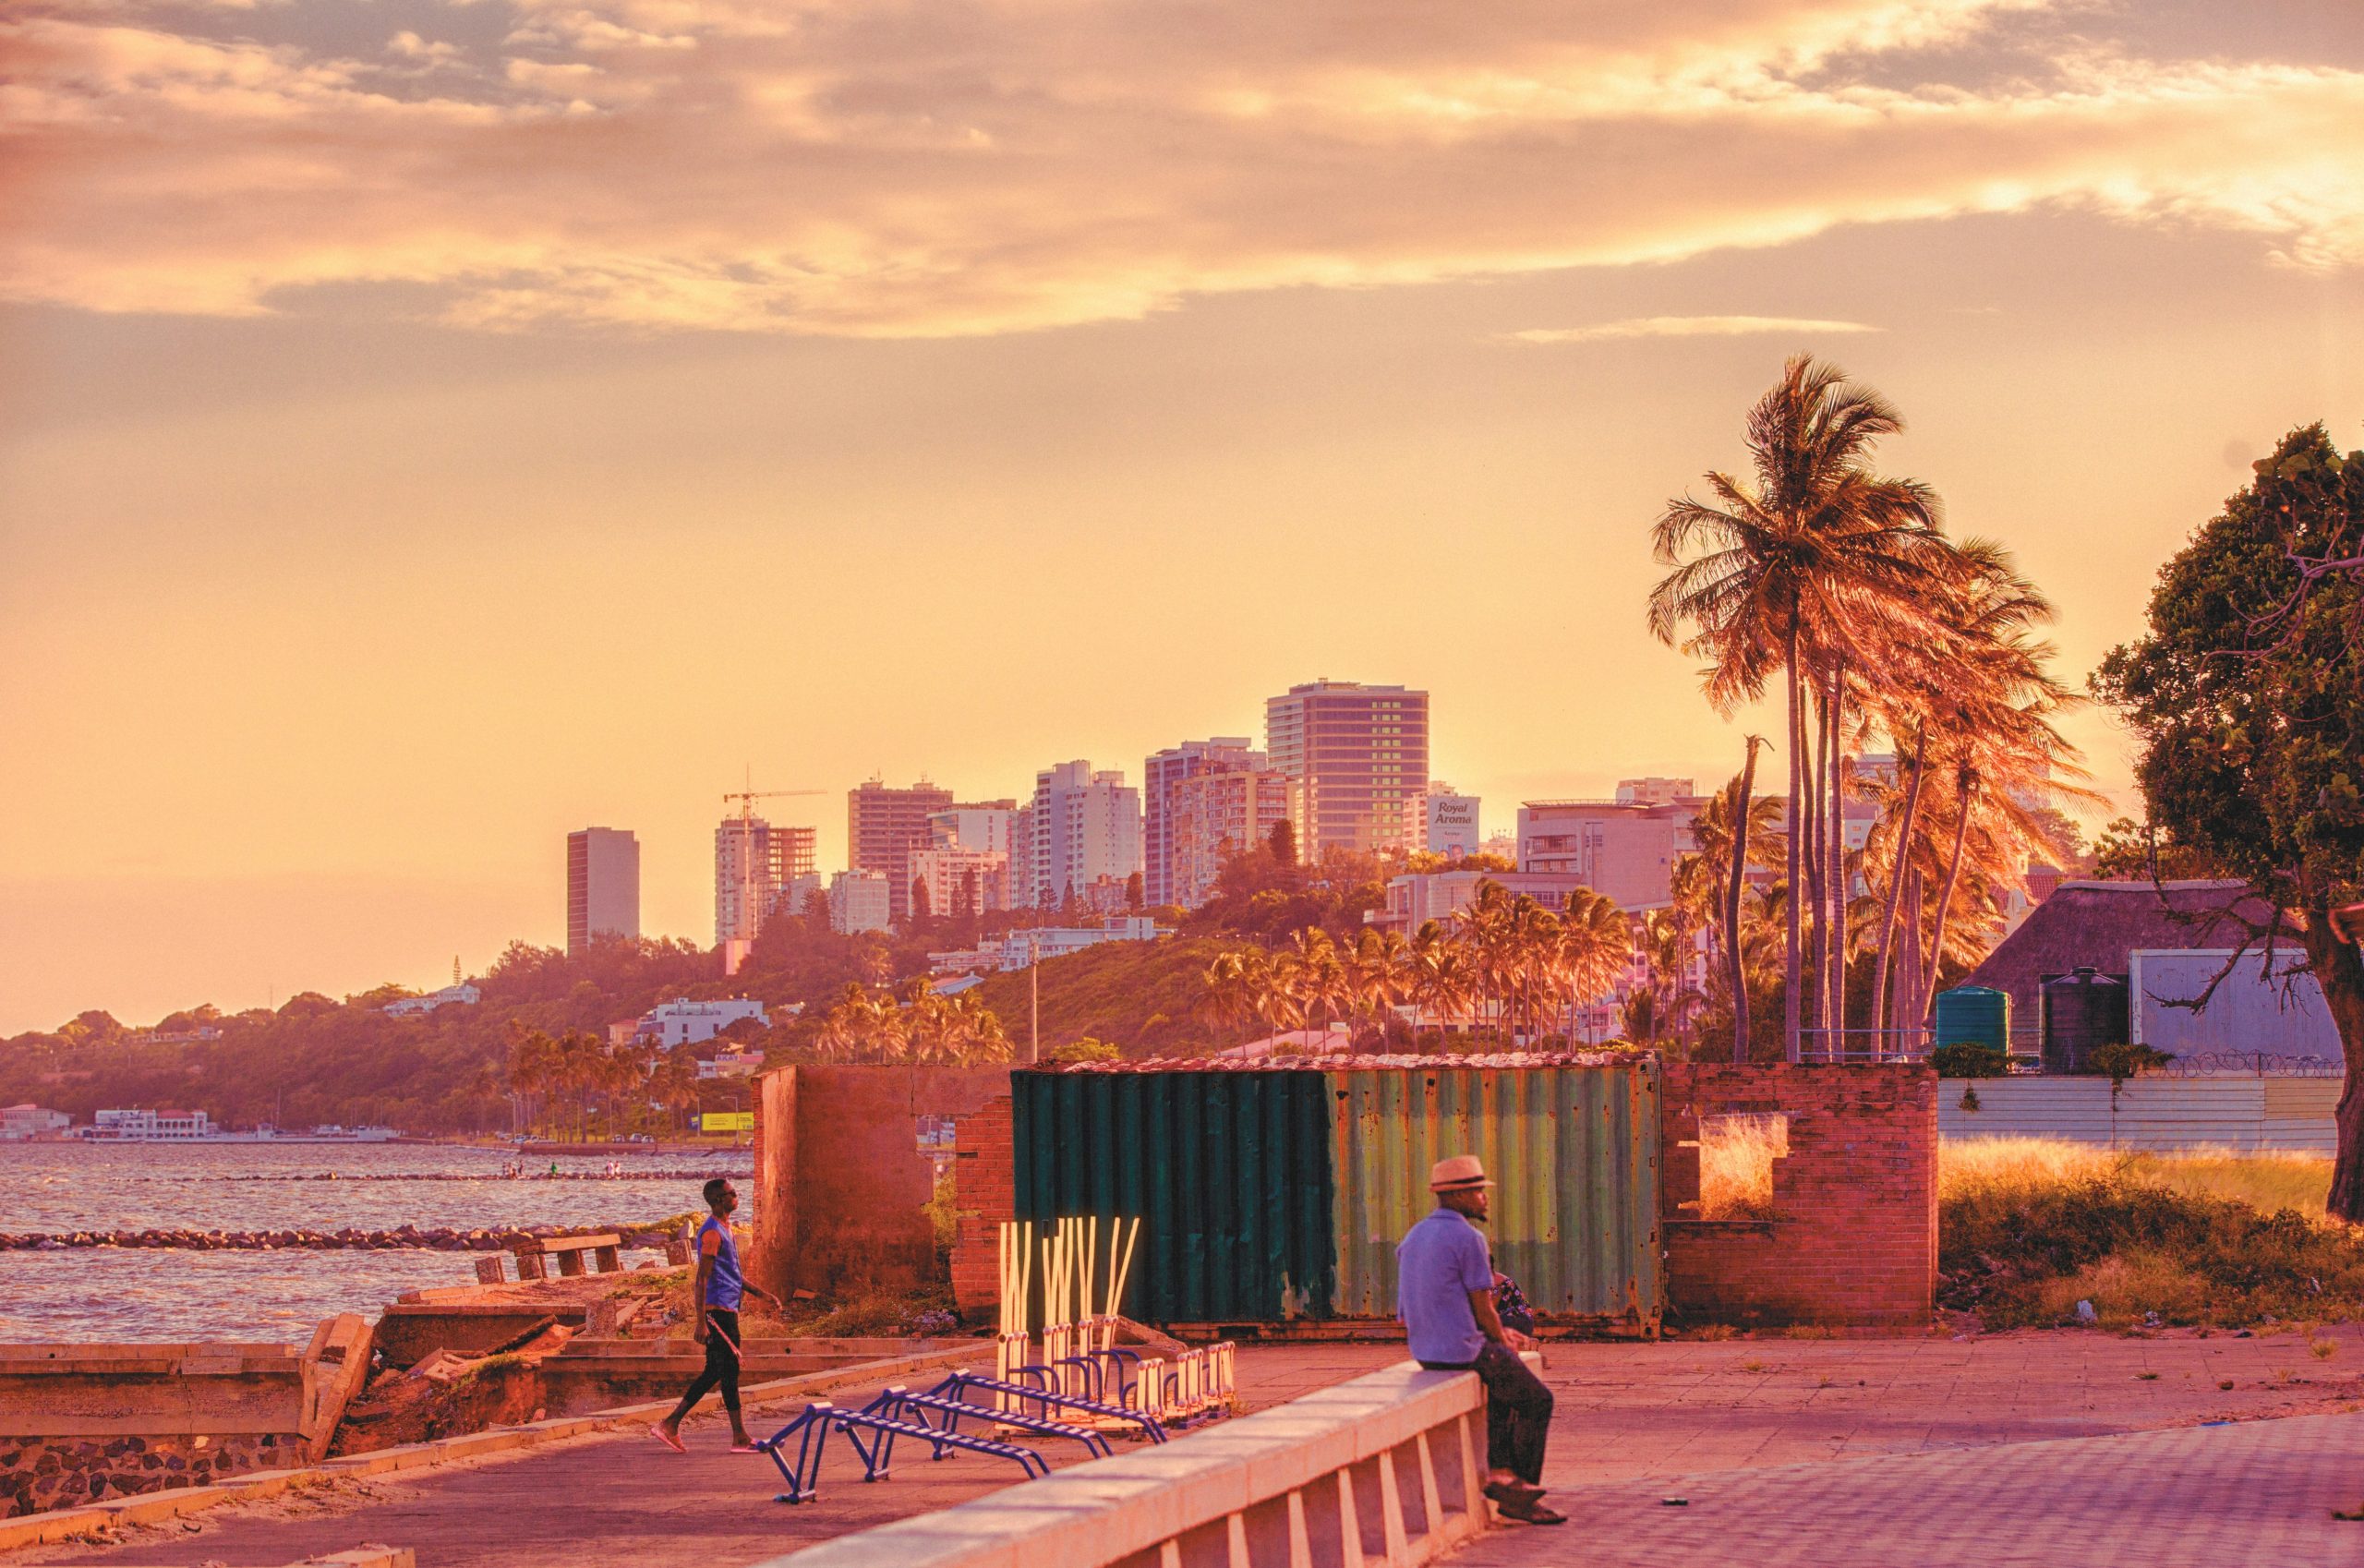 Official Fees for Industrial Property in Mozambique updated